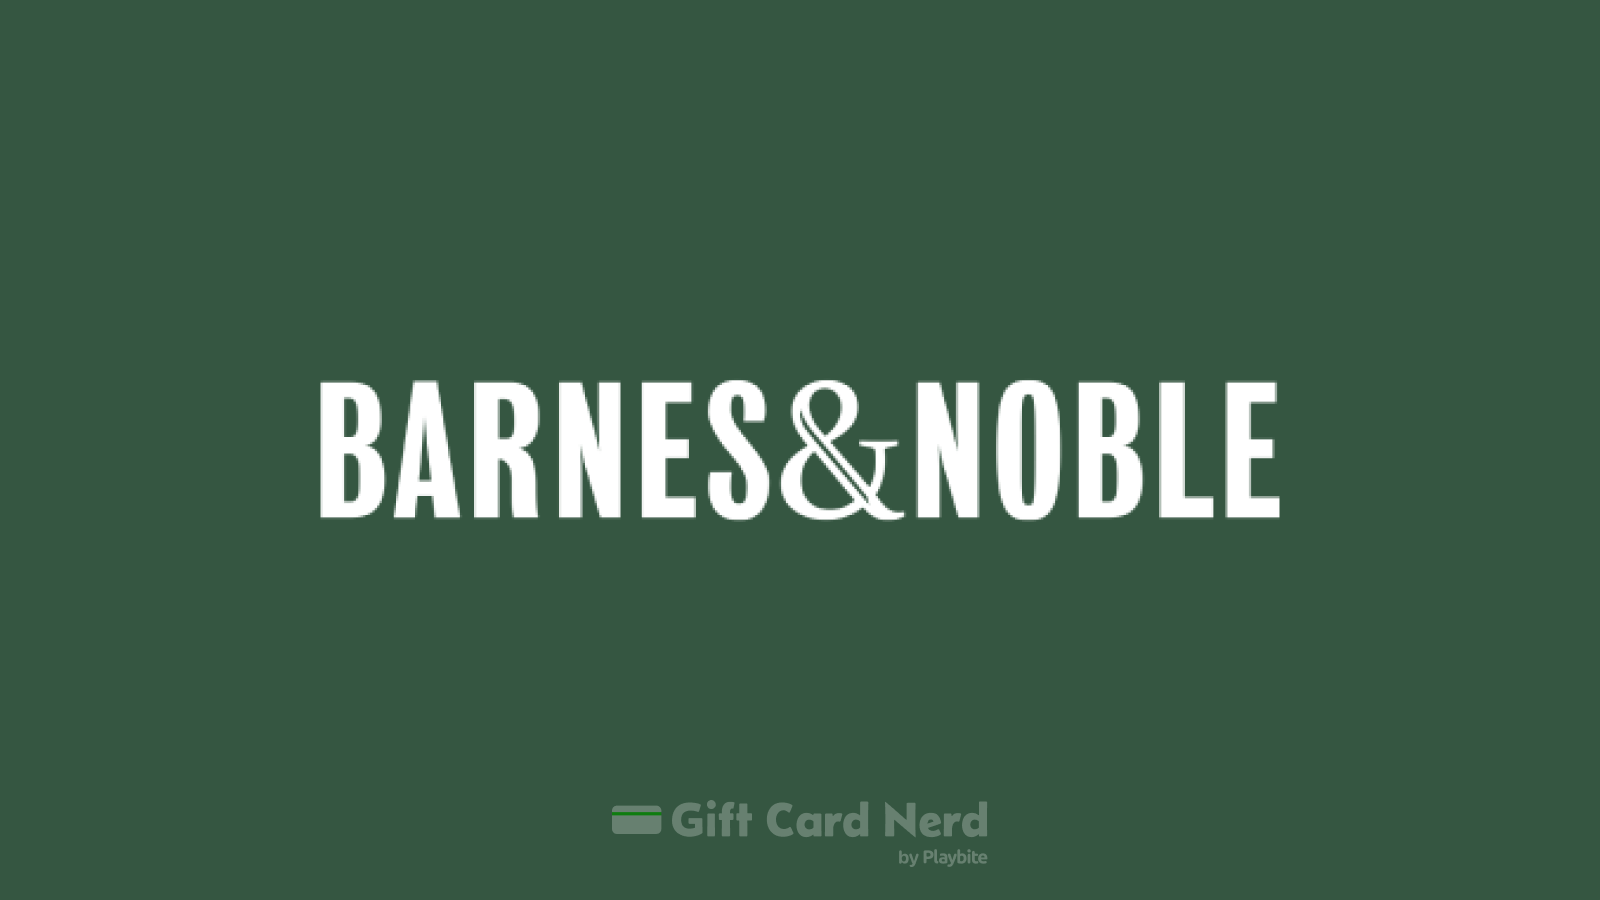 Can You Use a Barnes and Noble Gift Card on Apple Wallet?